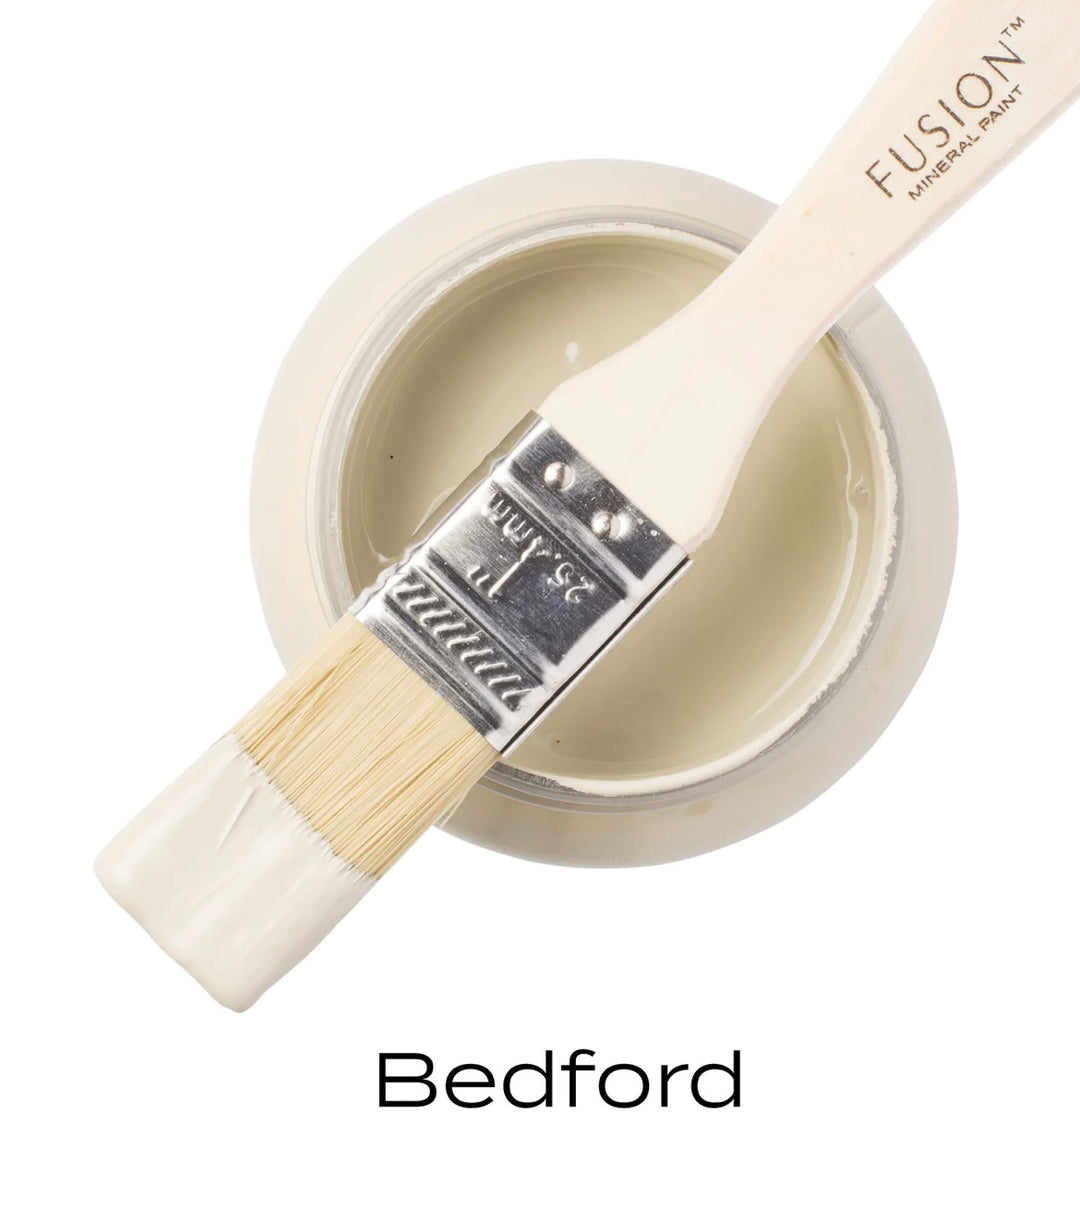 Fusion Mineral Paint - Bedford